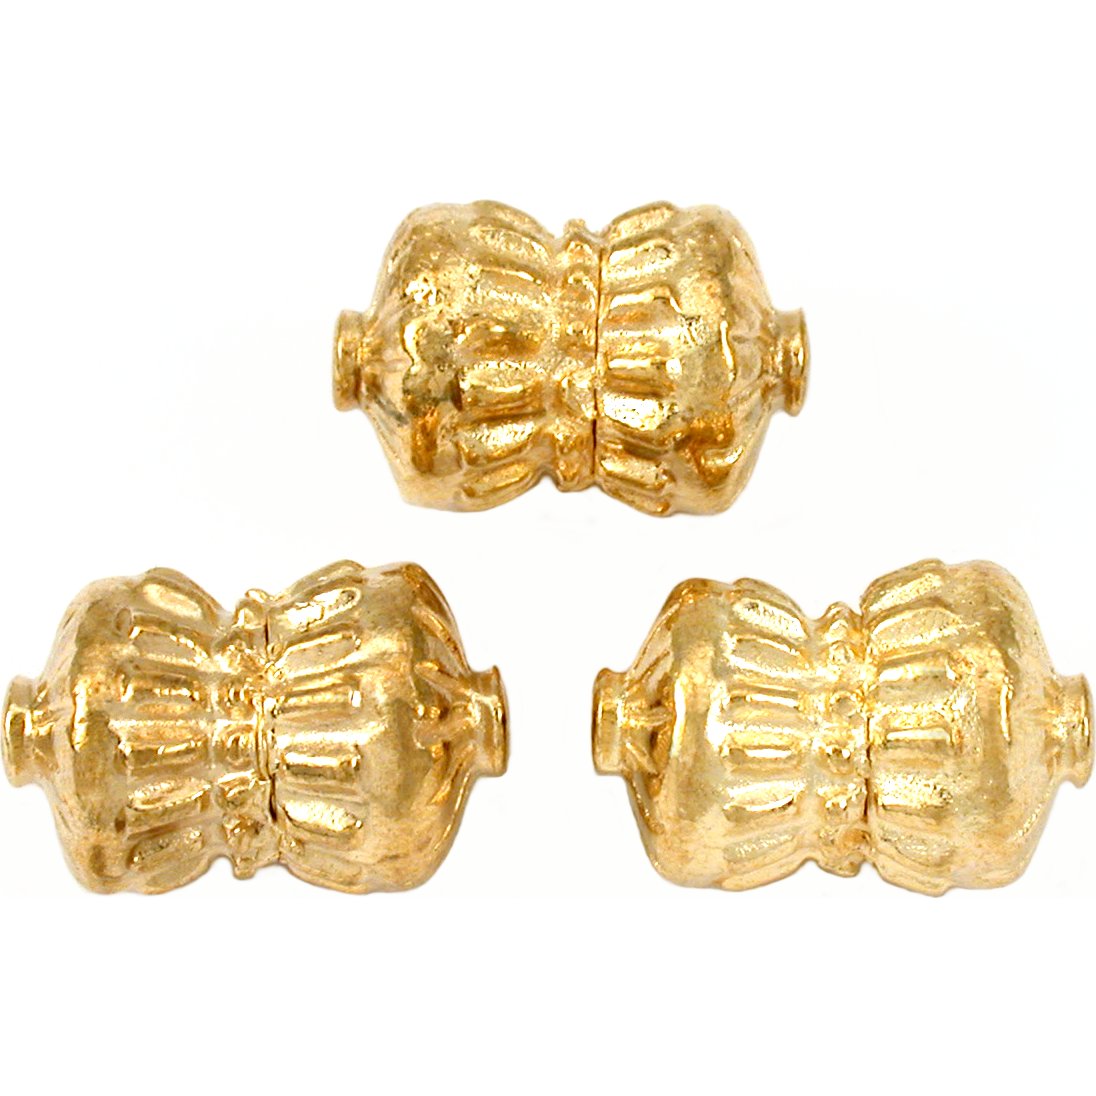 Bali Barrel Gold Plated Beads 17mm 19 Grams 3Pcs Approx.